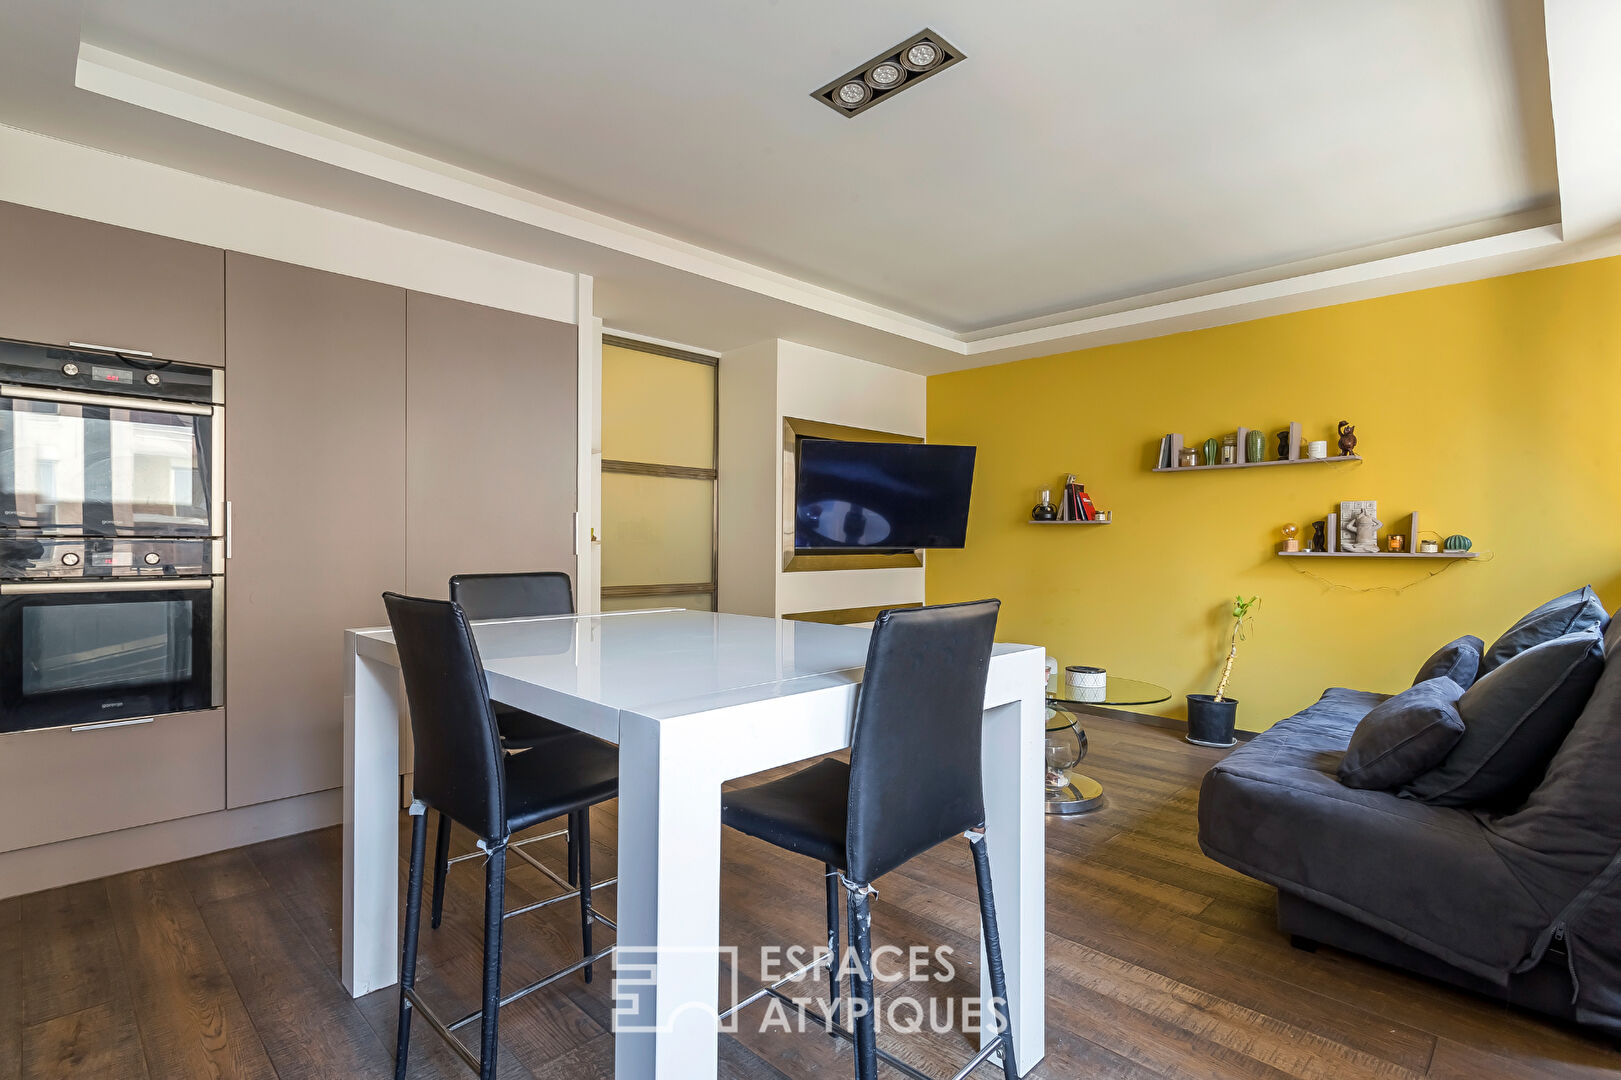 Renovated apartment near Tete d’Or park